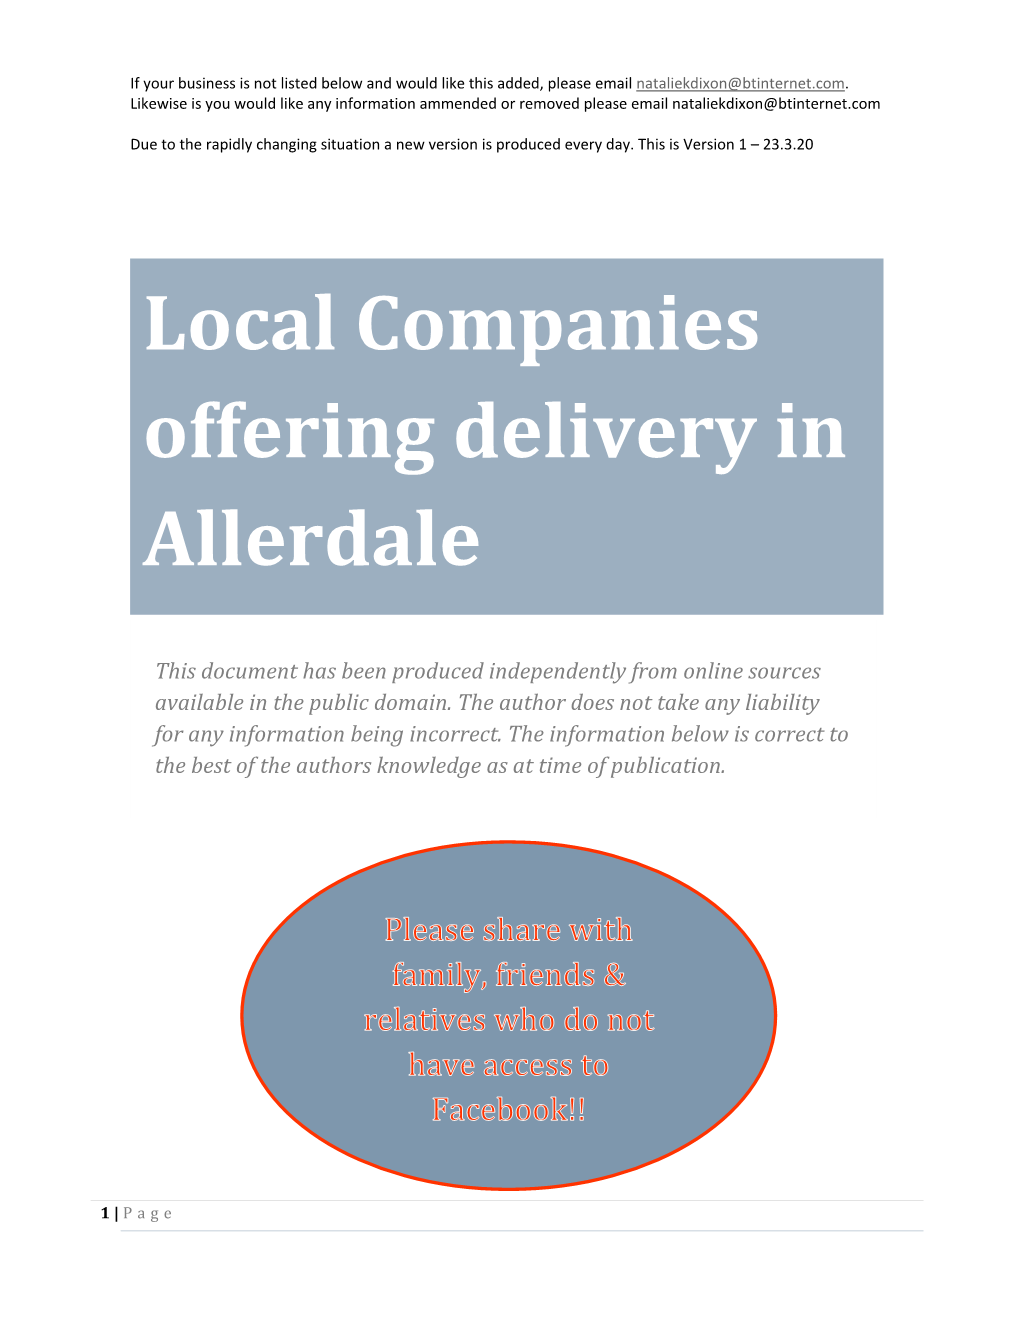 Delivery Services in Allerdale